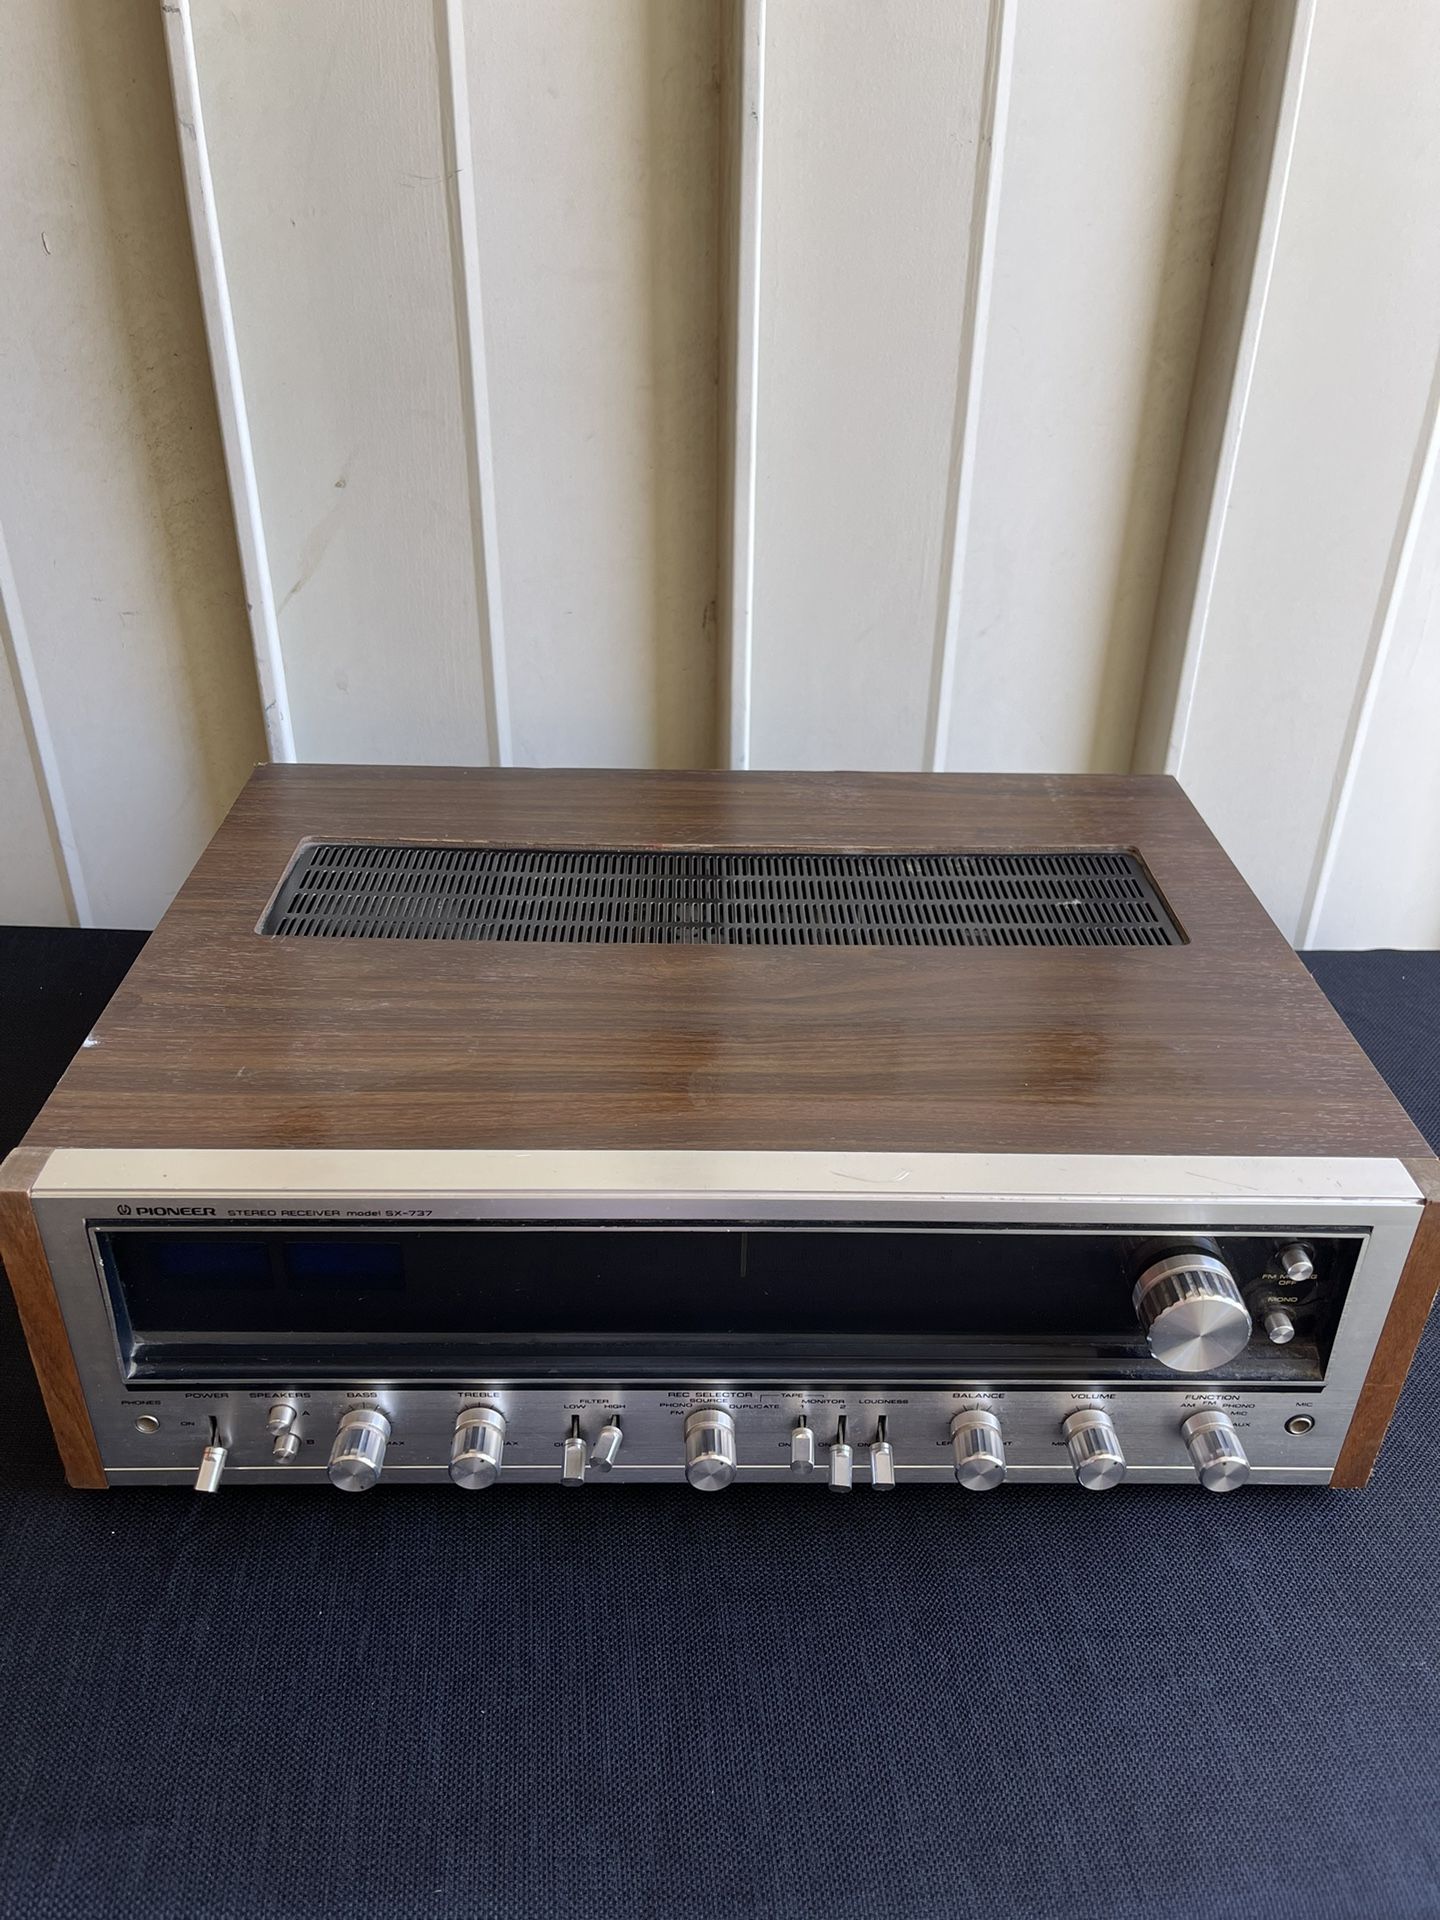 PIONEER  SX-737 AM/FM Stereo Receiver (1974-76)